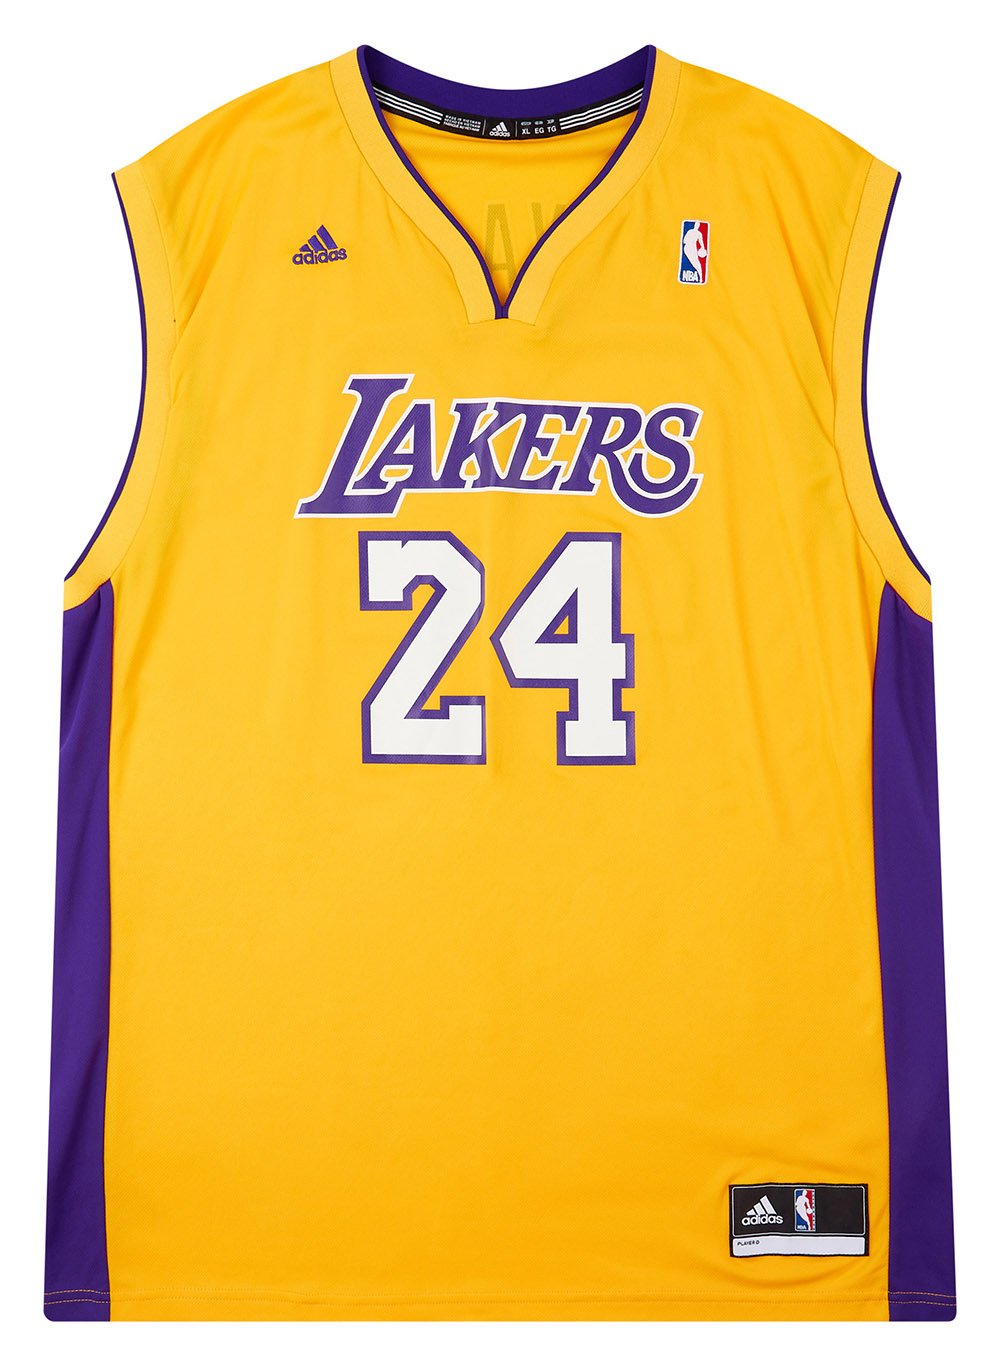 2010-14 LA Lakers Bryant #24 adidas Home Jersey (Excellent) XS